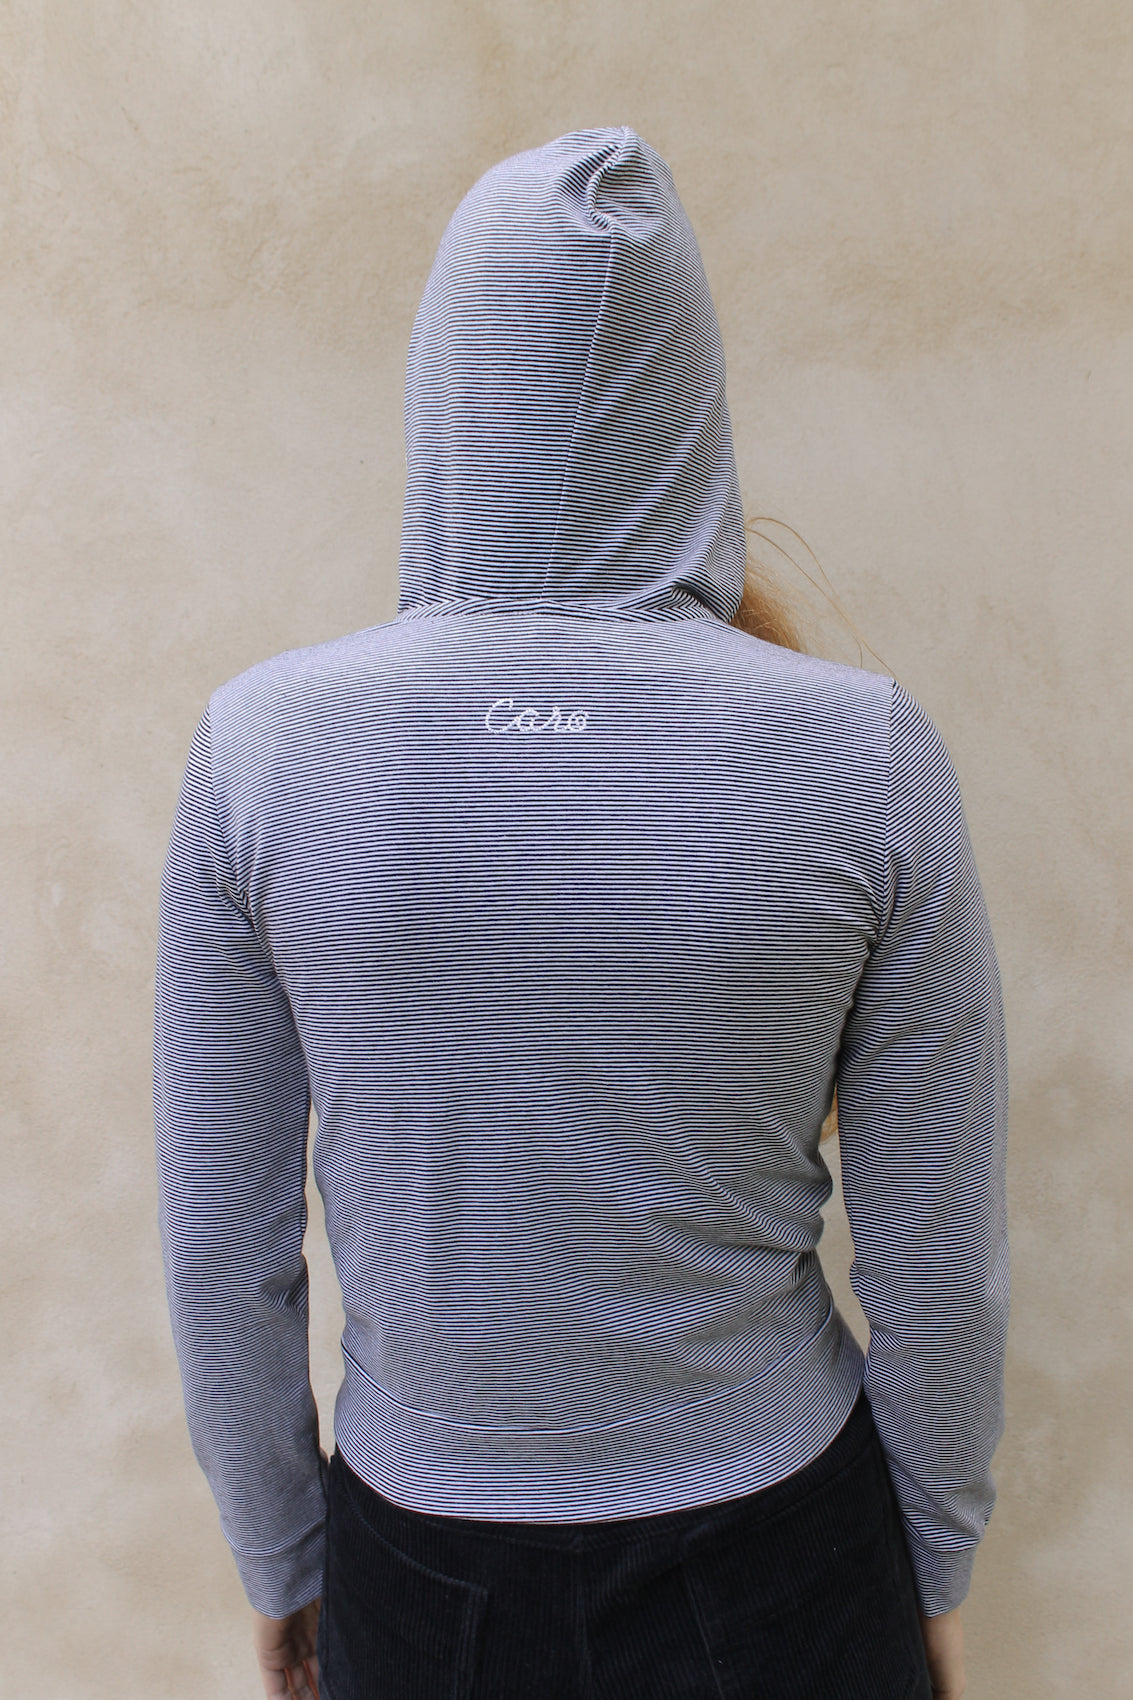 Caro Editions' new signature line in jersey cotton.  The Caro PJ Hoodie is a slightly fitted style with long sleeves, a zipper opening on the front, and embroidered Caro Editions logo on the back.   Also available in Red White stripe.  Style the Caro PJ Hoodie under a jacket or shirt, with matching Caro PJ Leggings, jeans, or a skirt.  Material: 95% cotton, 5% elastane. Bow: 100% Polyester.  The model is 179cm (5'10") and is wearing a size S.